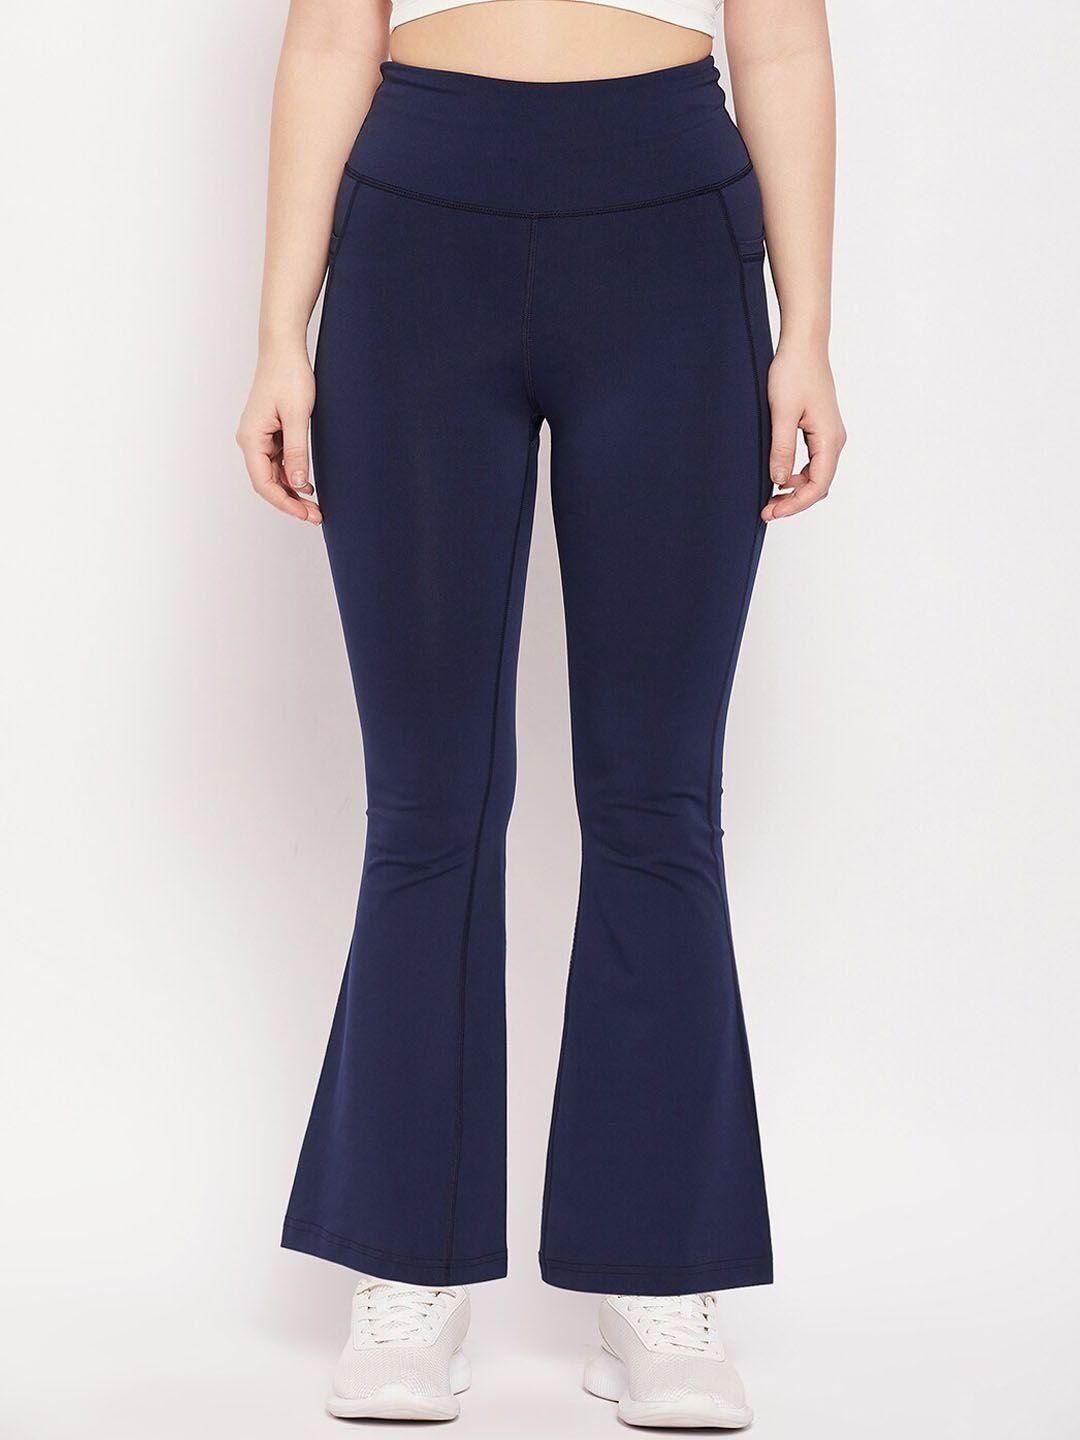 athlisis-women-bootcut-fit-track-pants